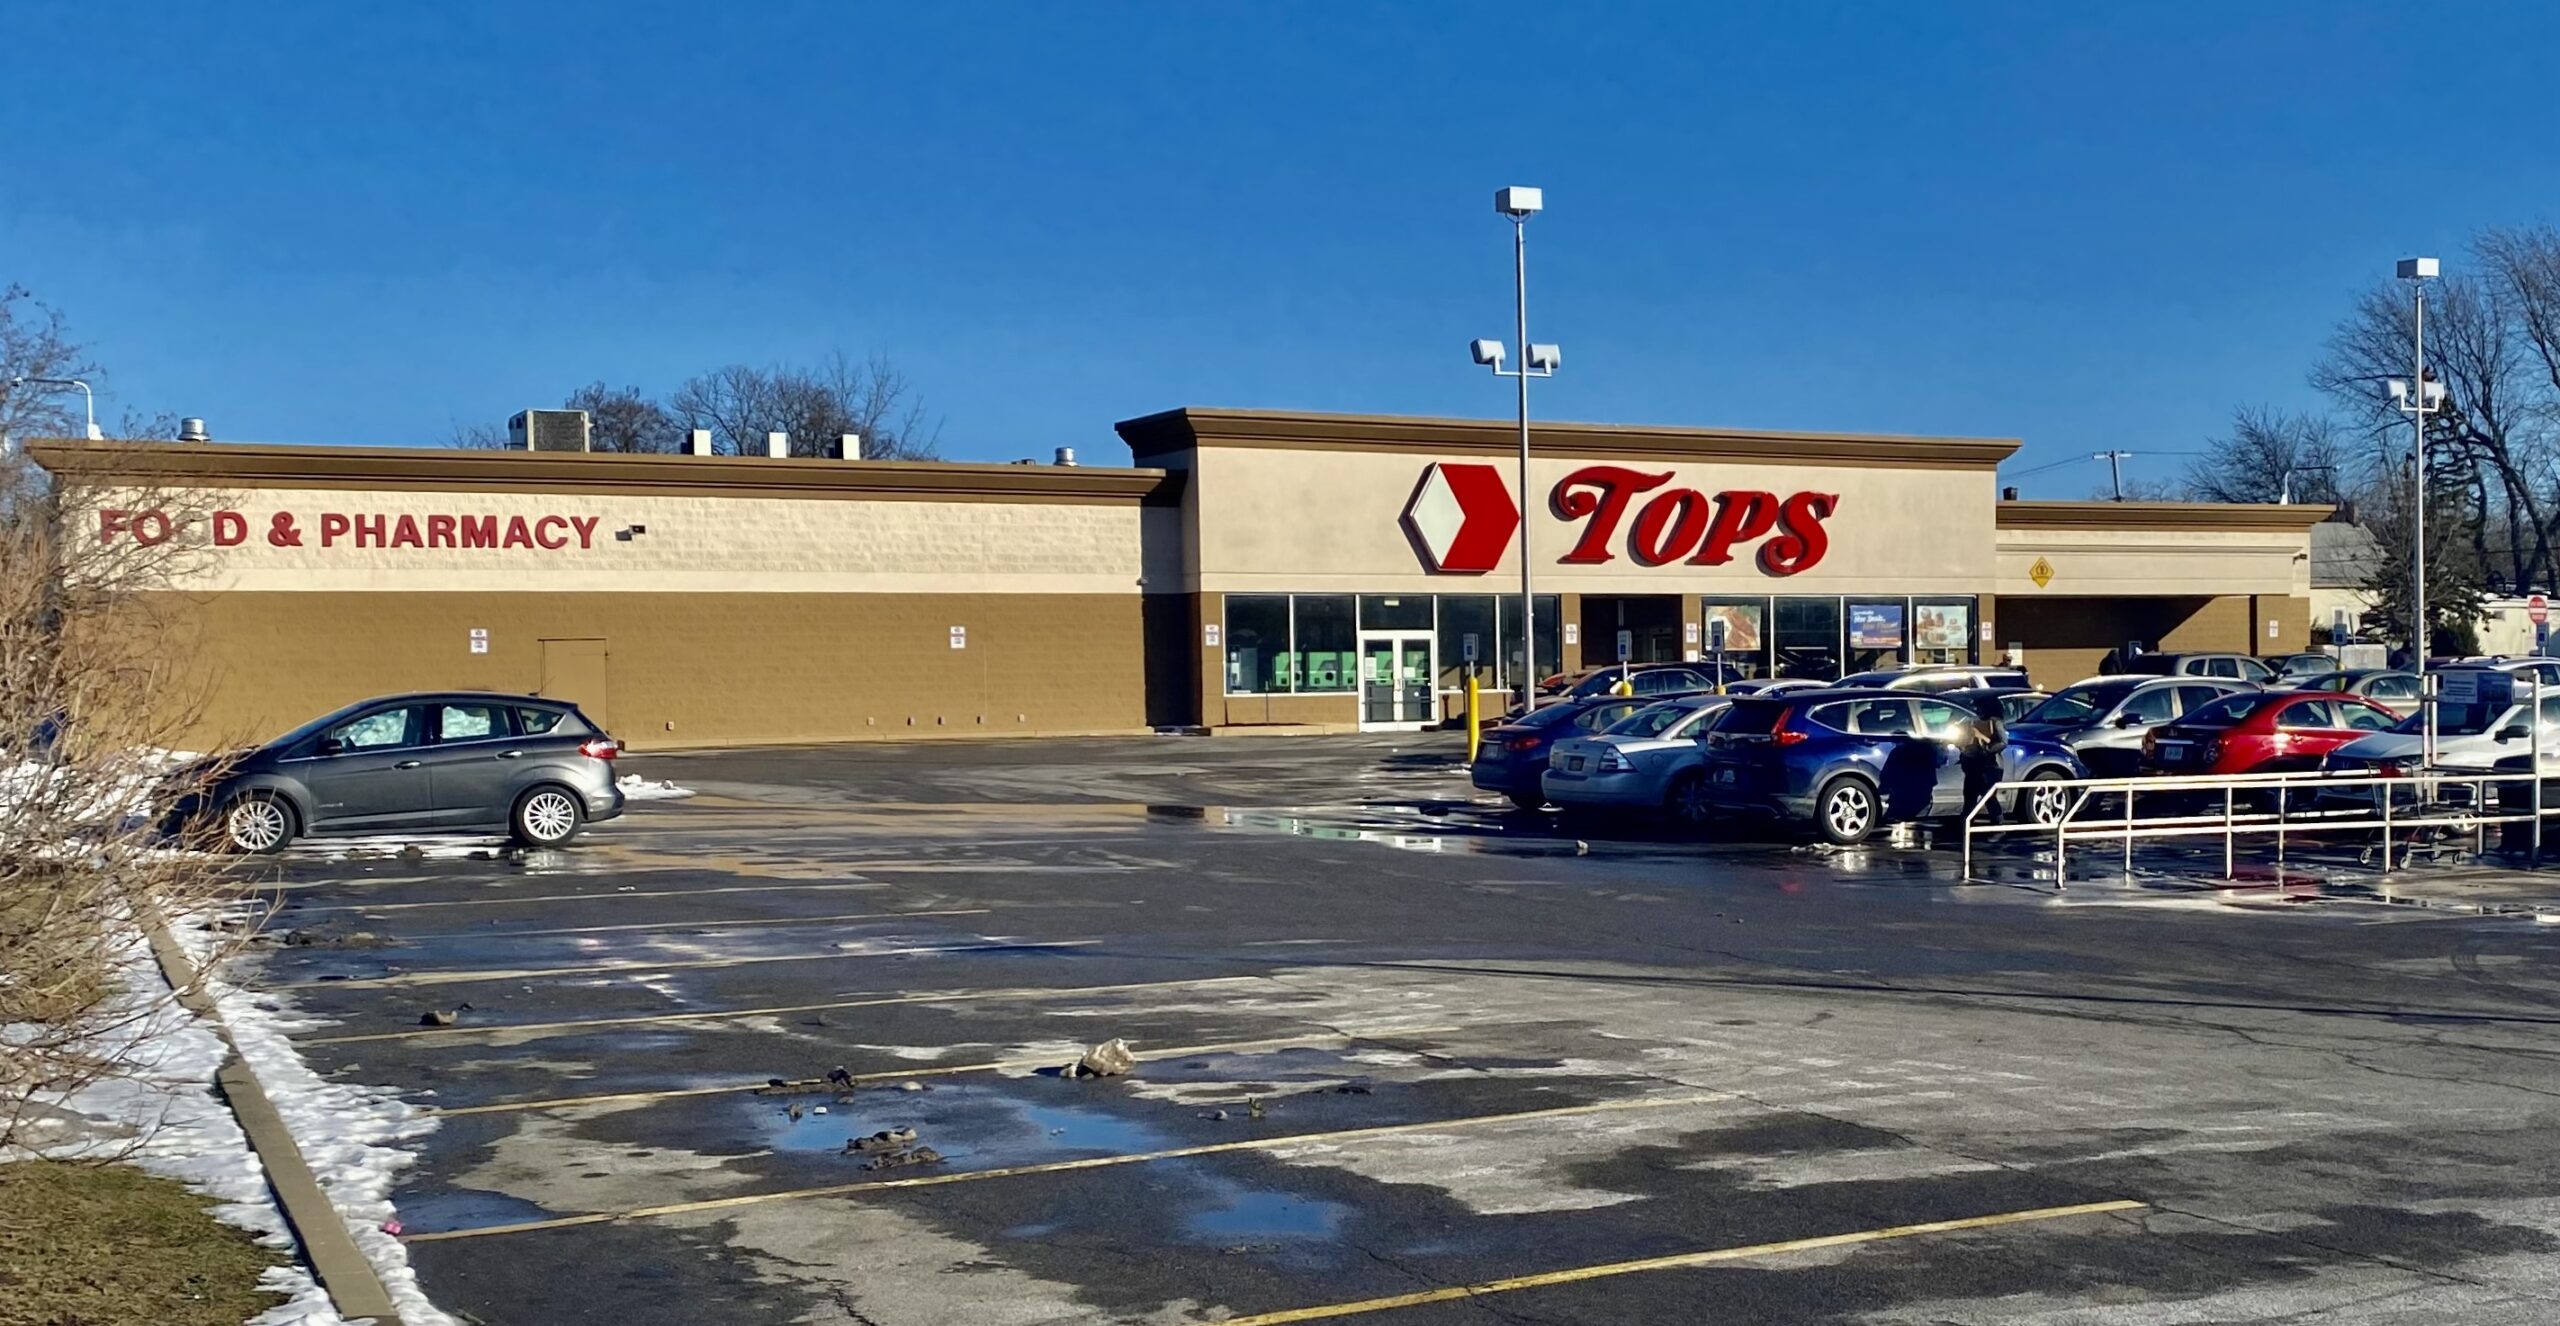 Tops Friendly Markets on Buffalo's East Side was the scene of a racially motived mass shooting on May 14th, 2022. Photo credit: Bagumba